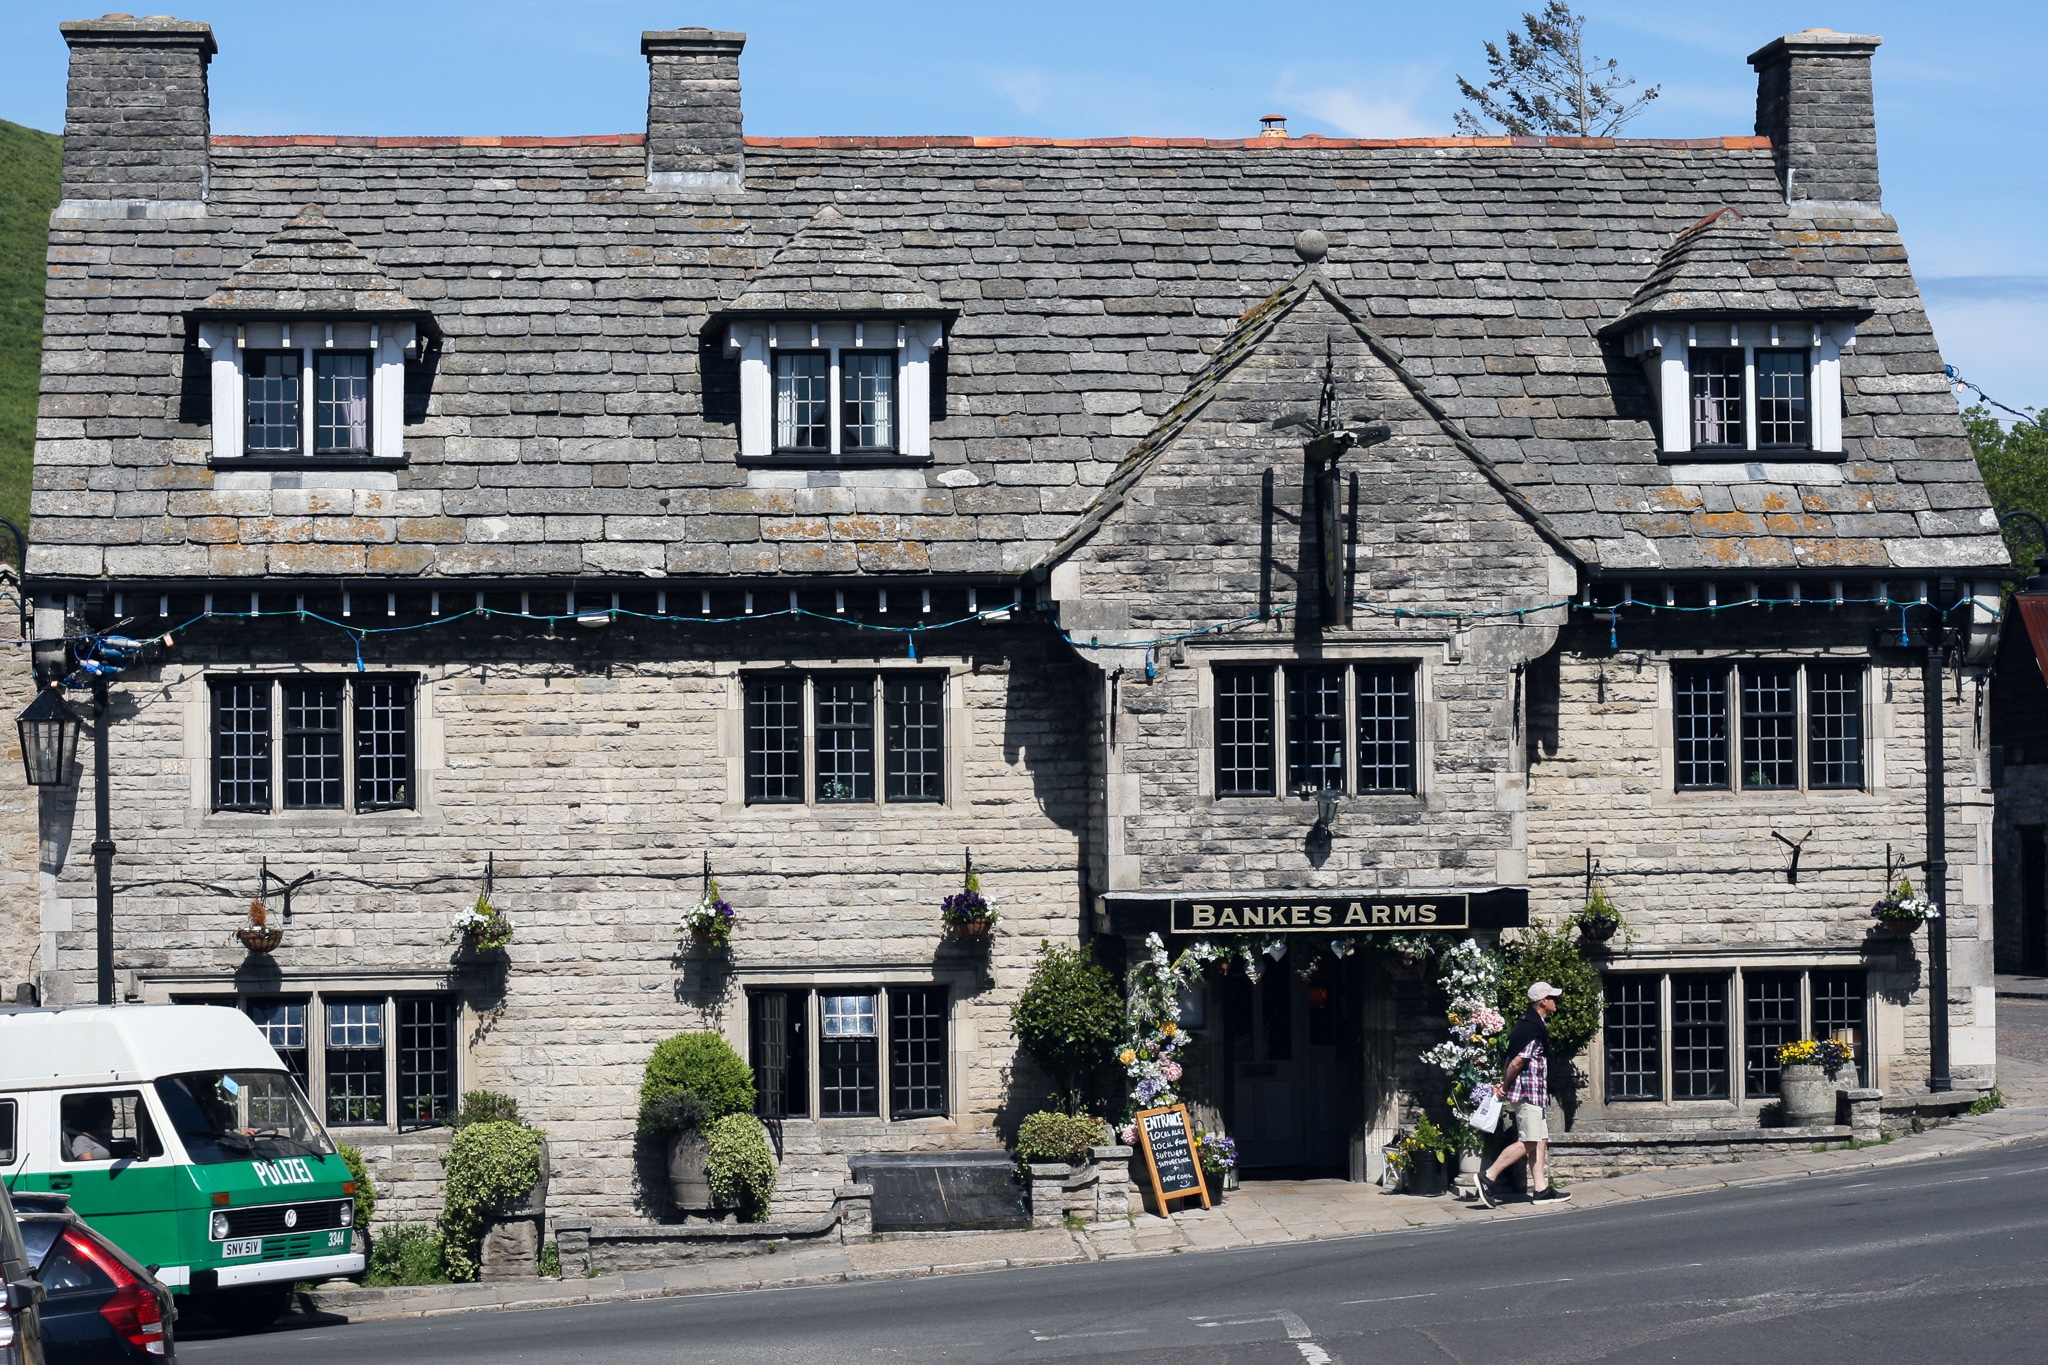 Review of the Bankes Arms Hotel in Corfe Castle